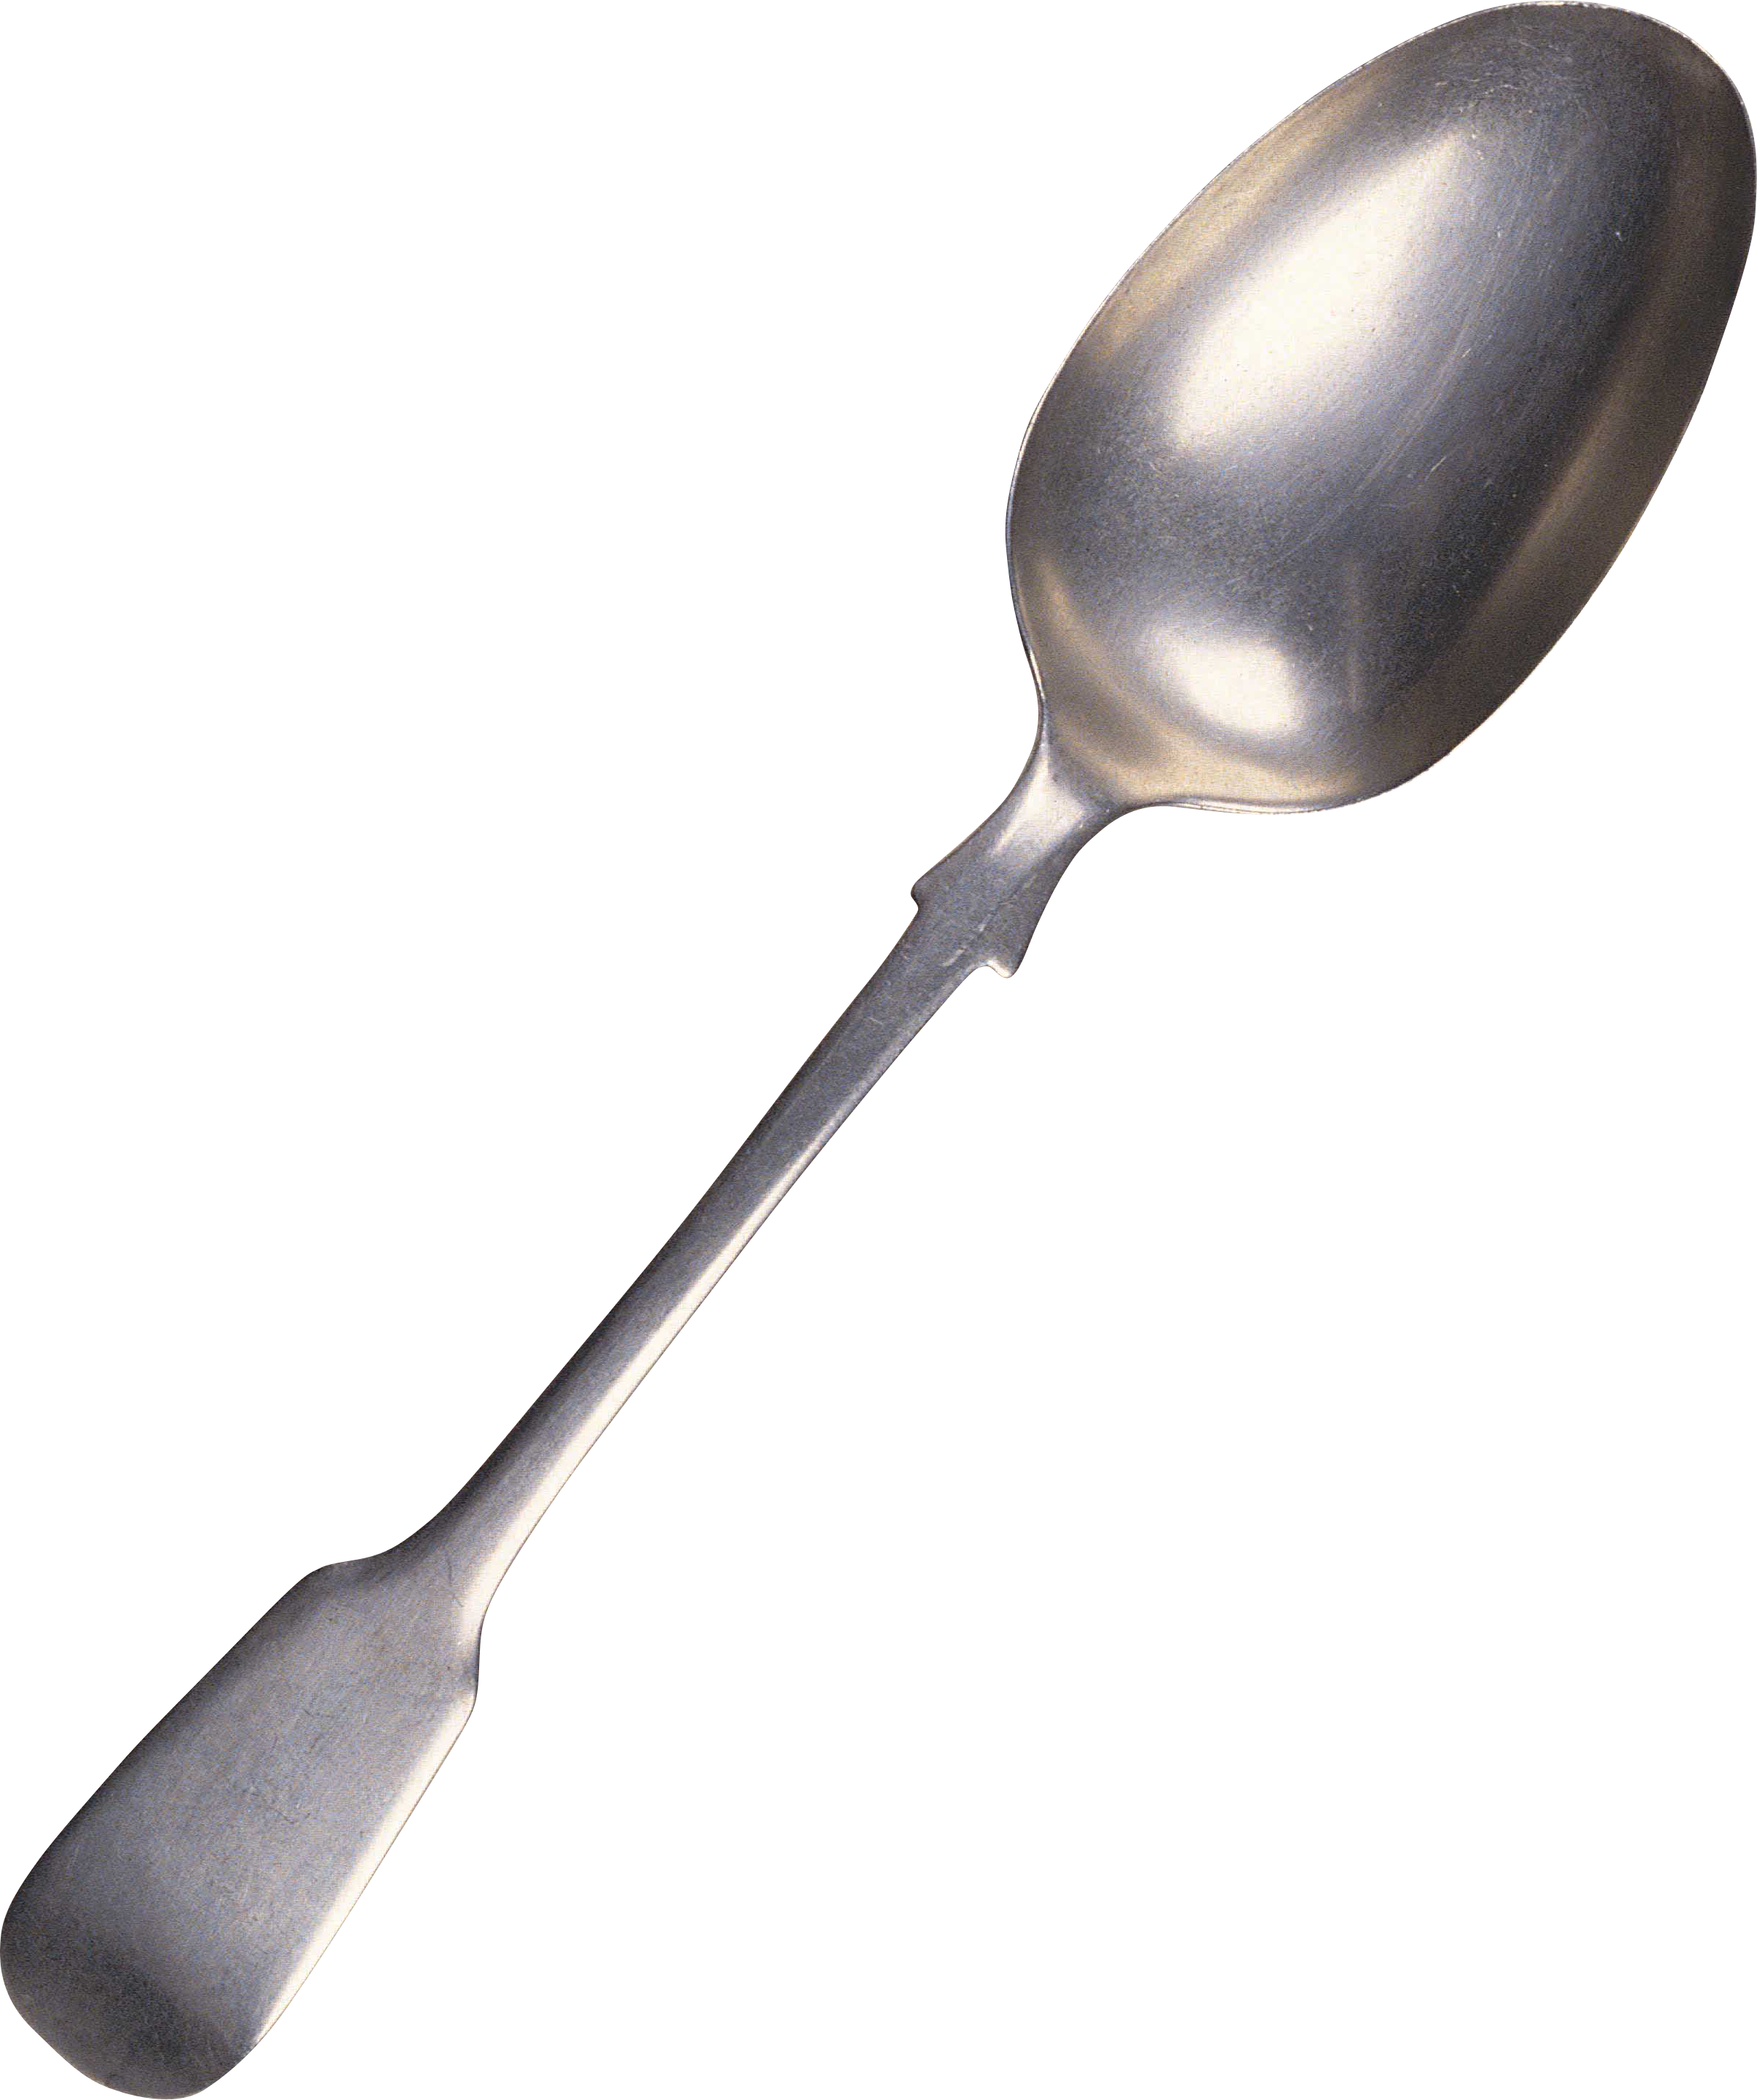 Spoon PNG images Download 